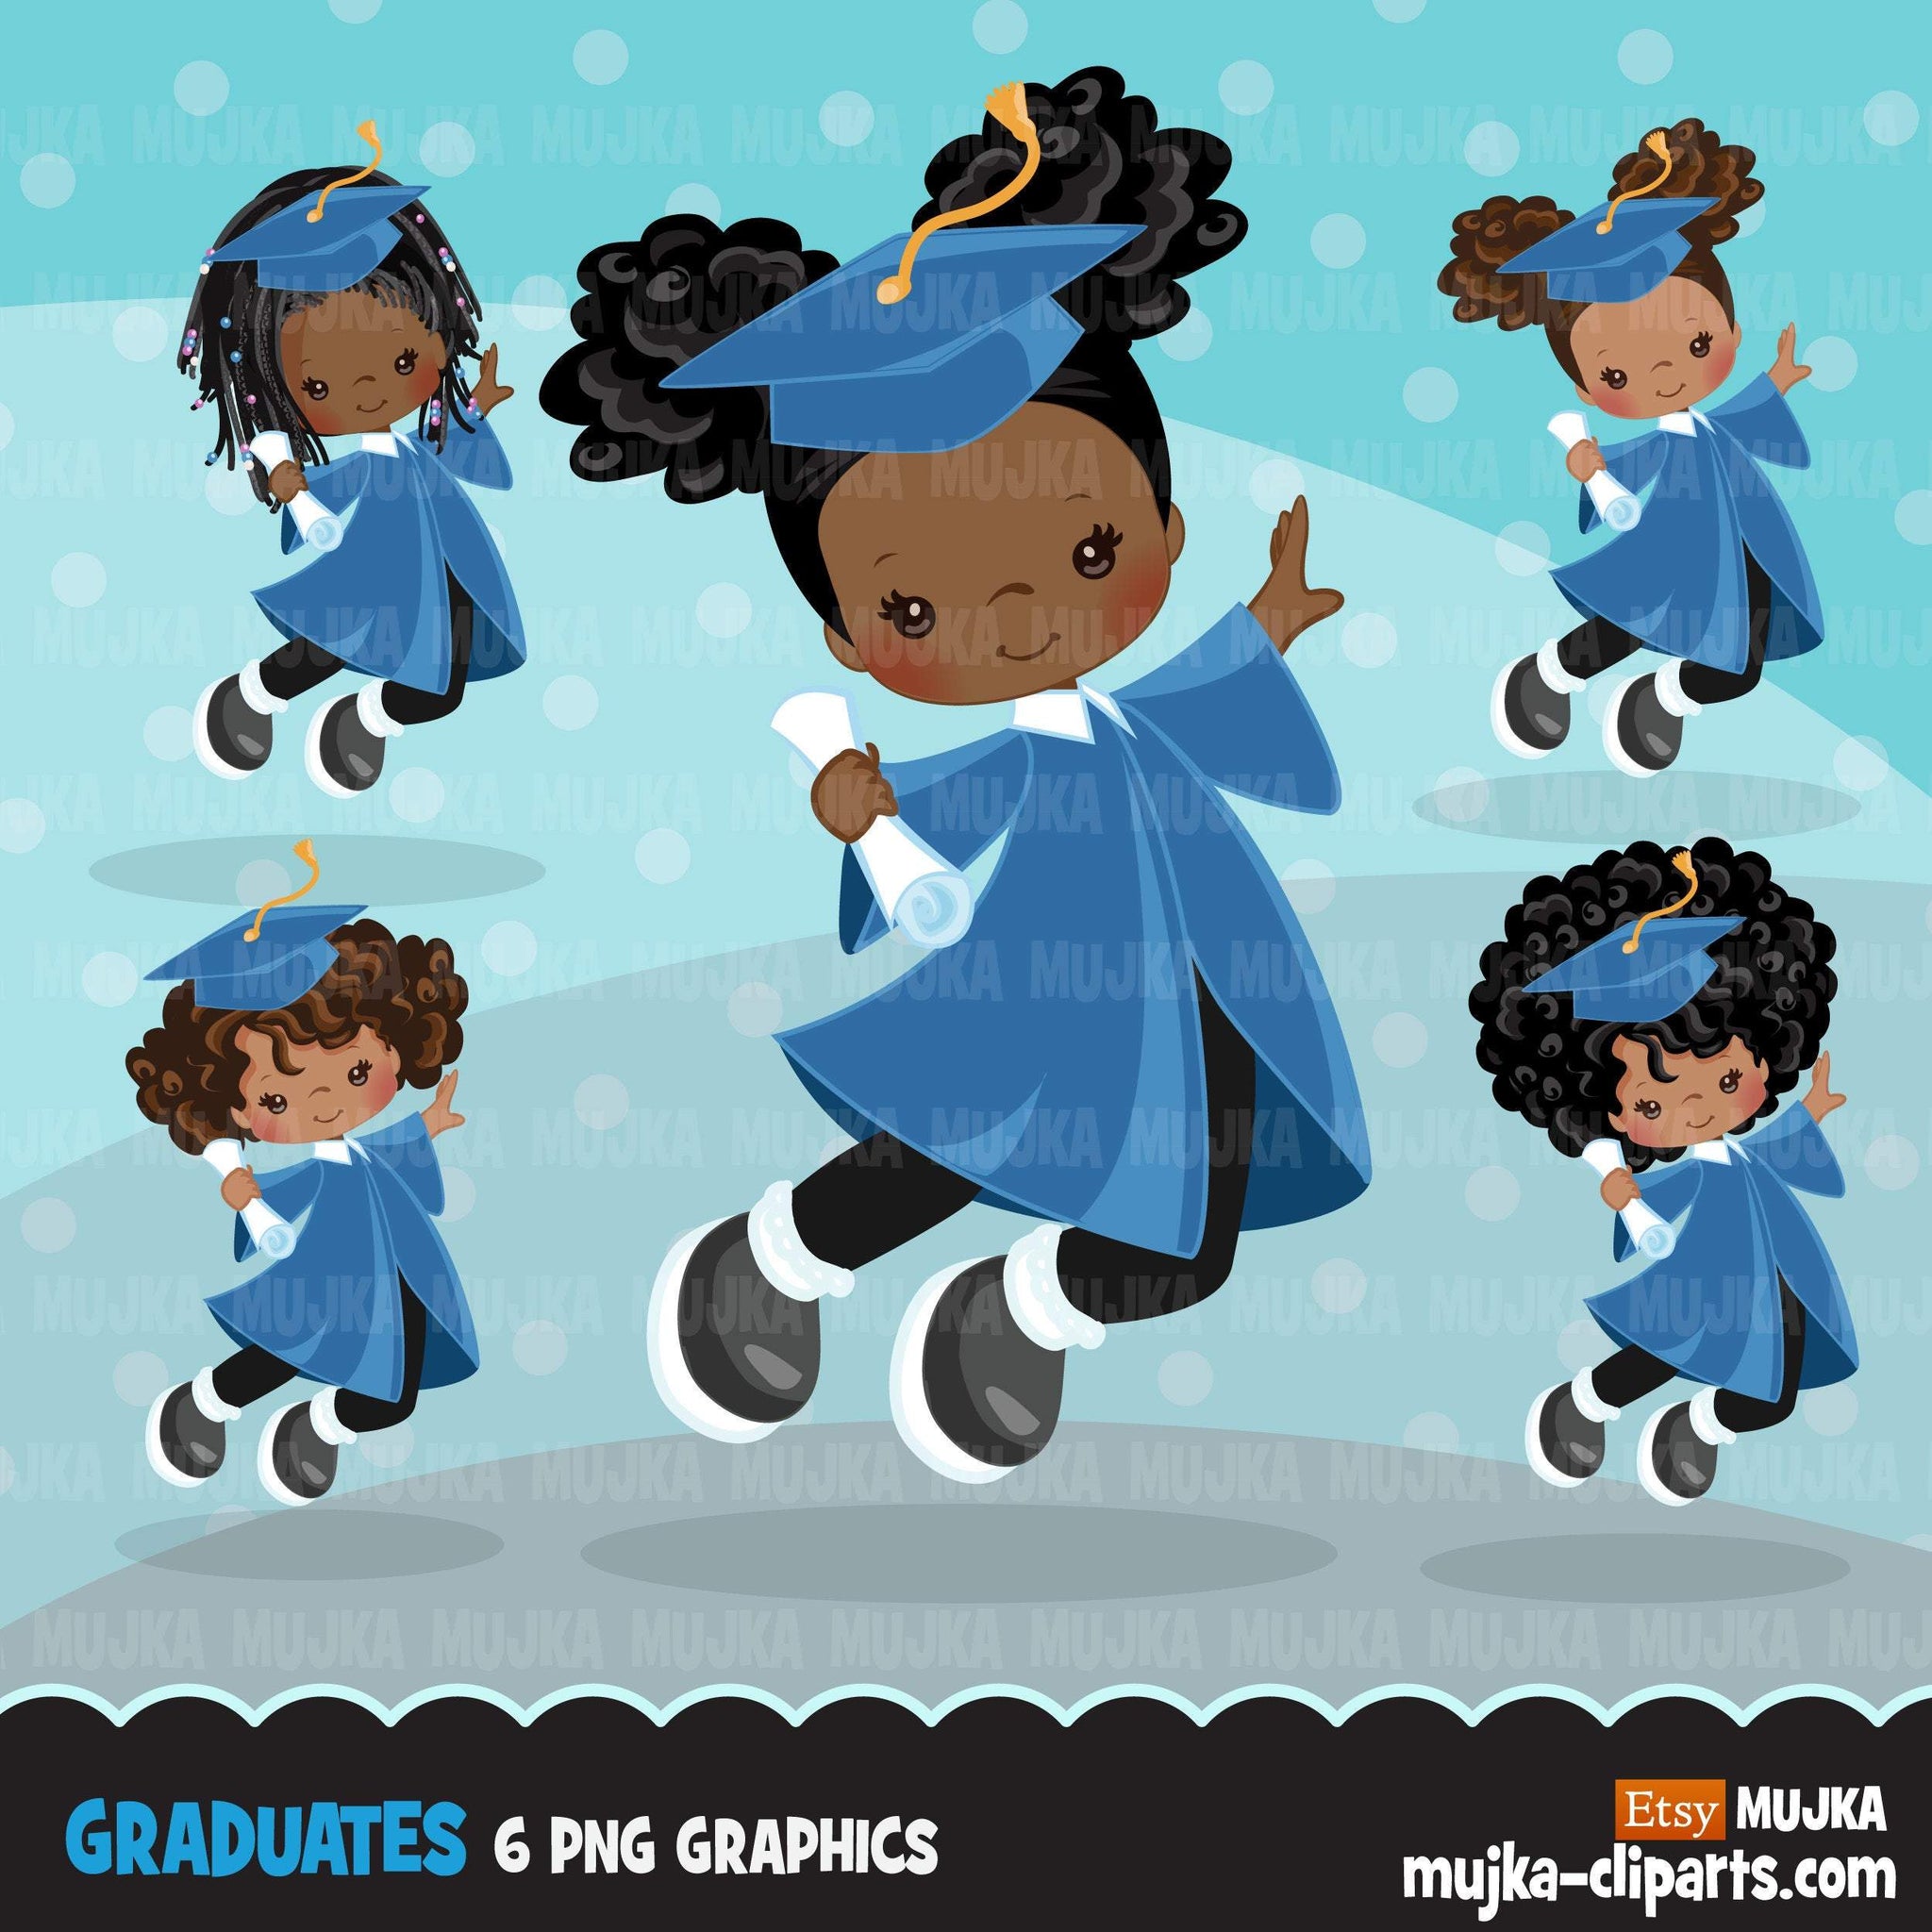 Graduation Clipart, graduate black girls with blue gown, cape and scroll jumping, school, student class of graphics, PNG clip art